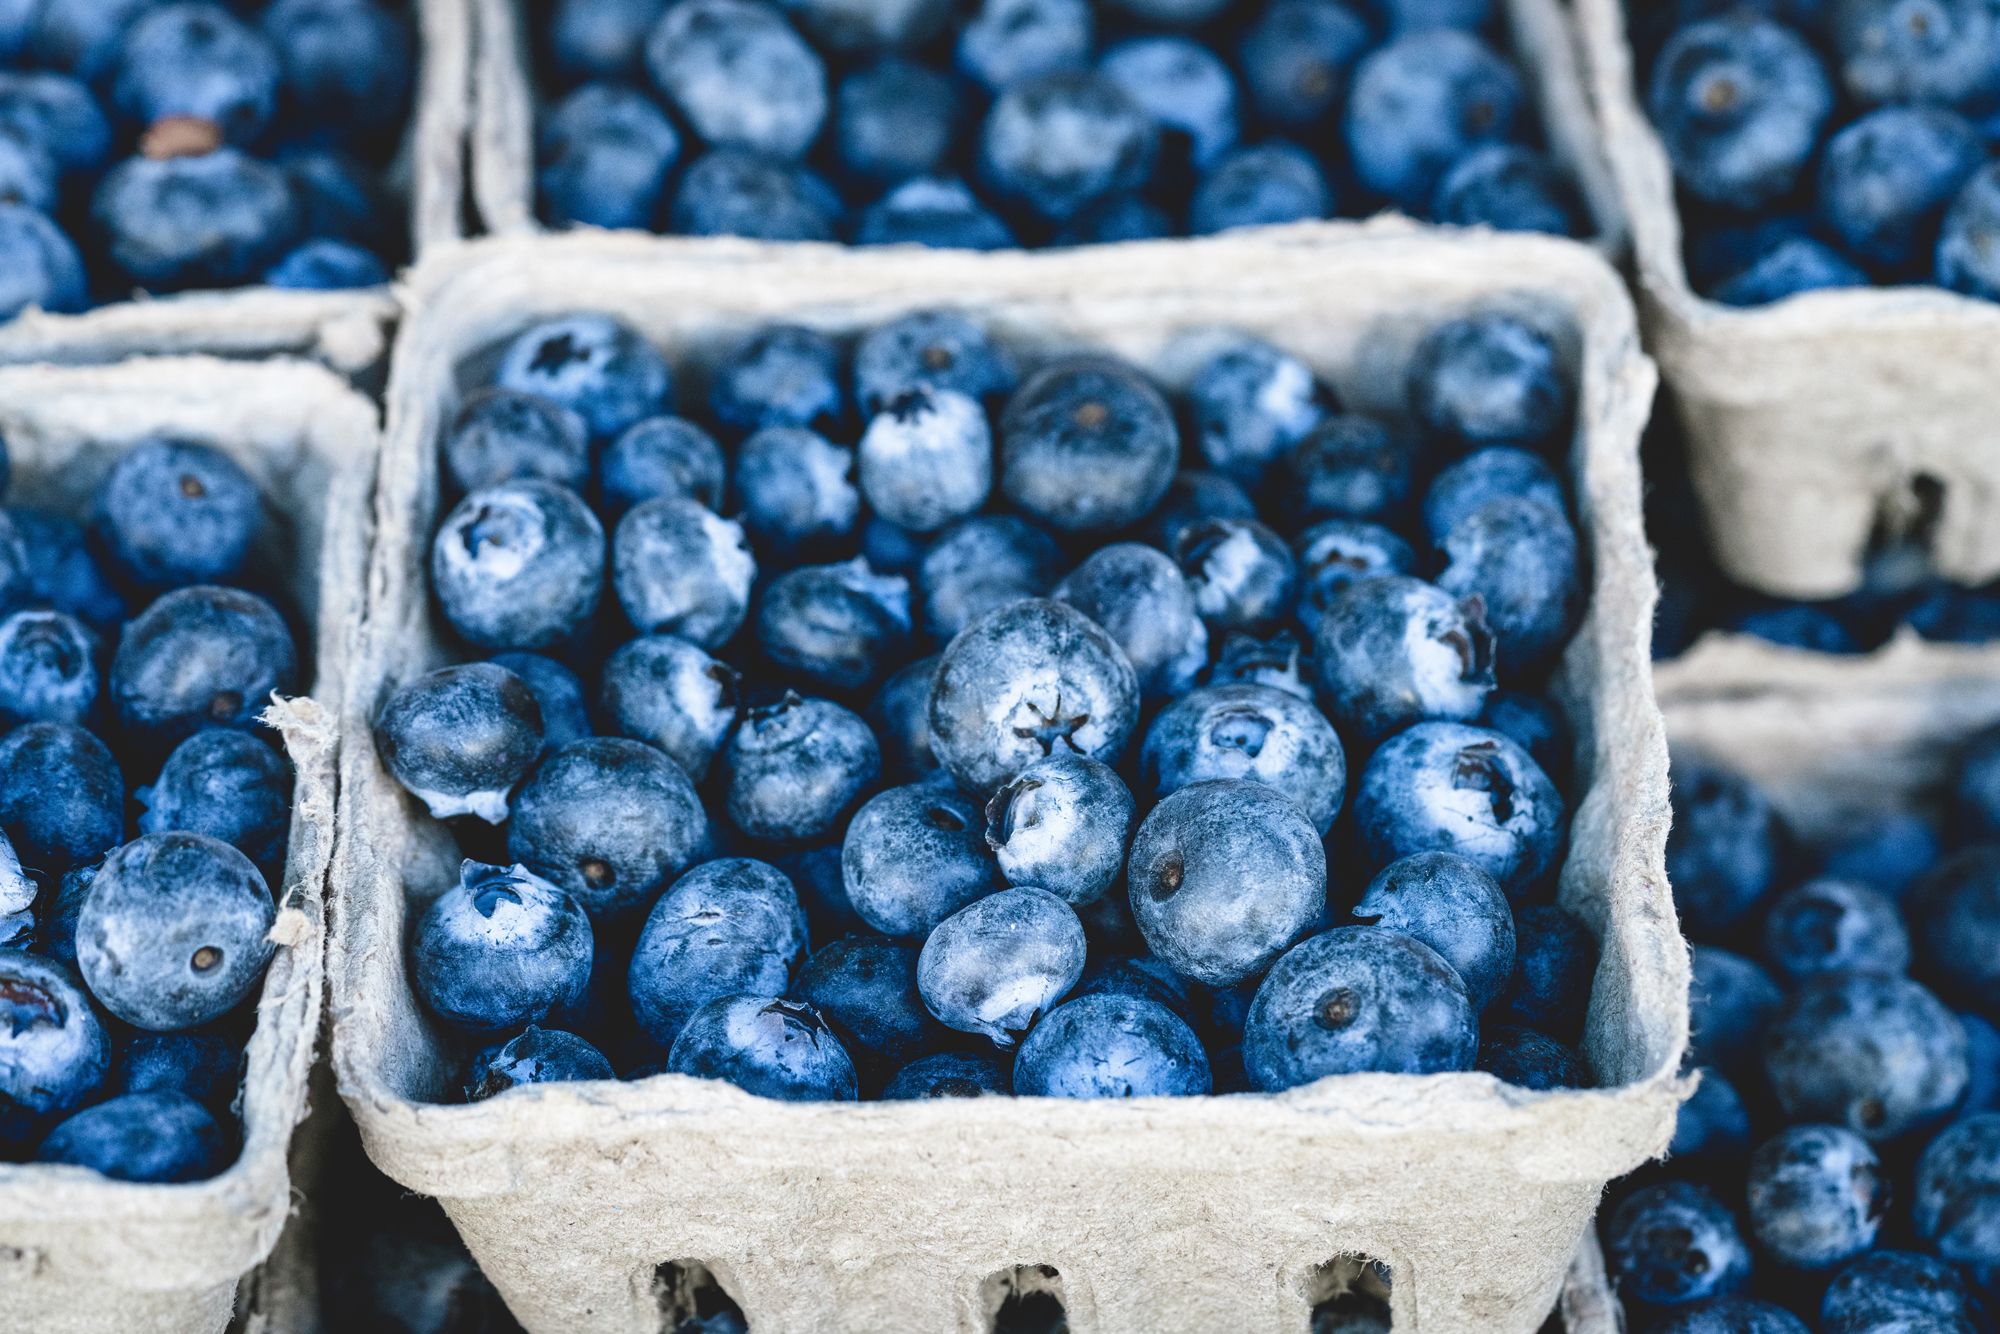 Blue, Bilberry, Blueberry, Berry, Superfood, Fruit, Prune, Food, Plant, Prunus spinosa, 